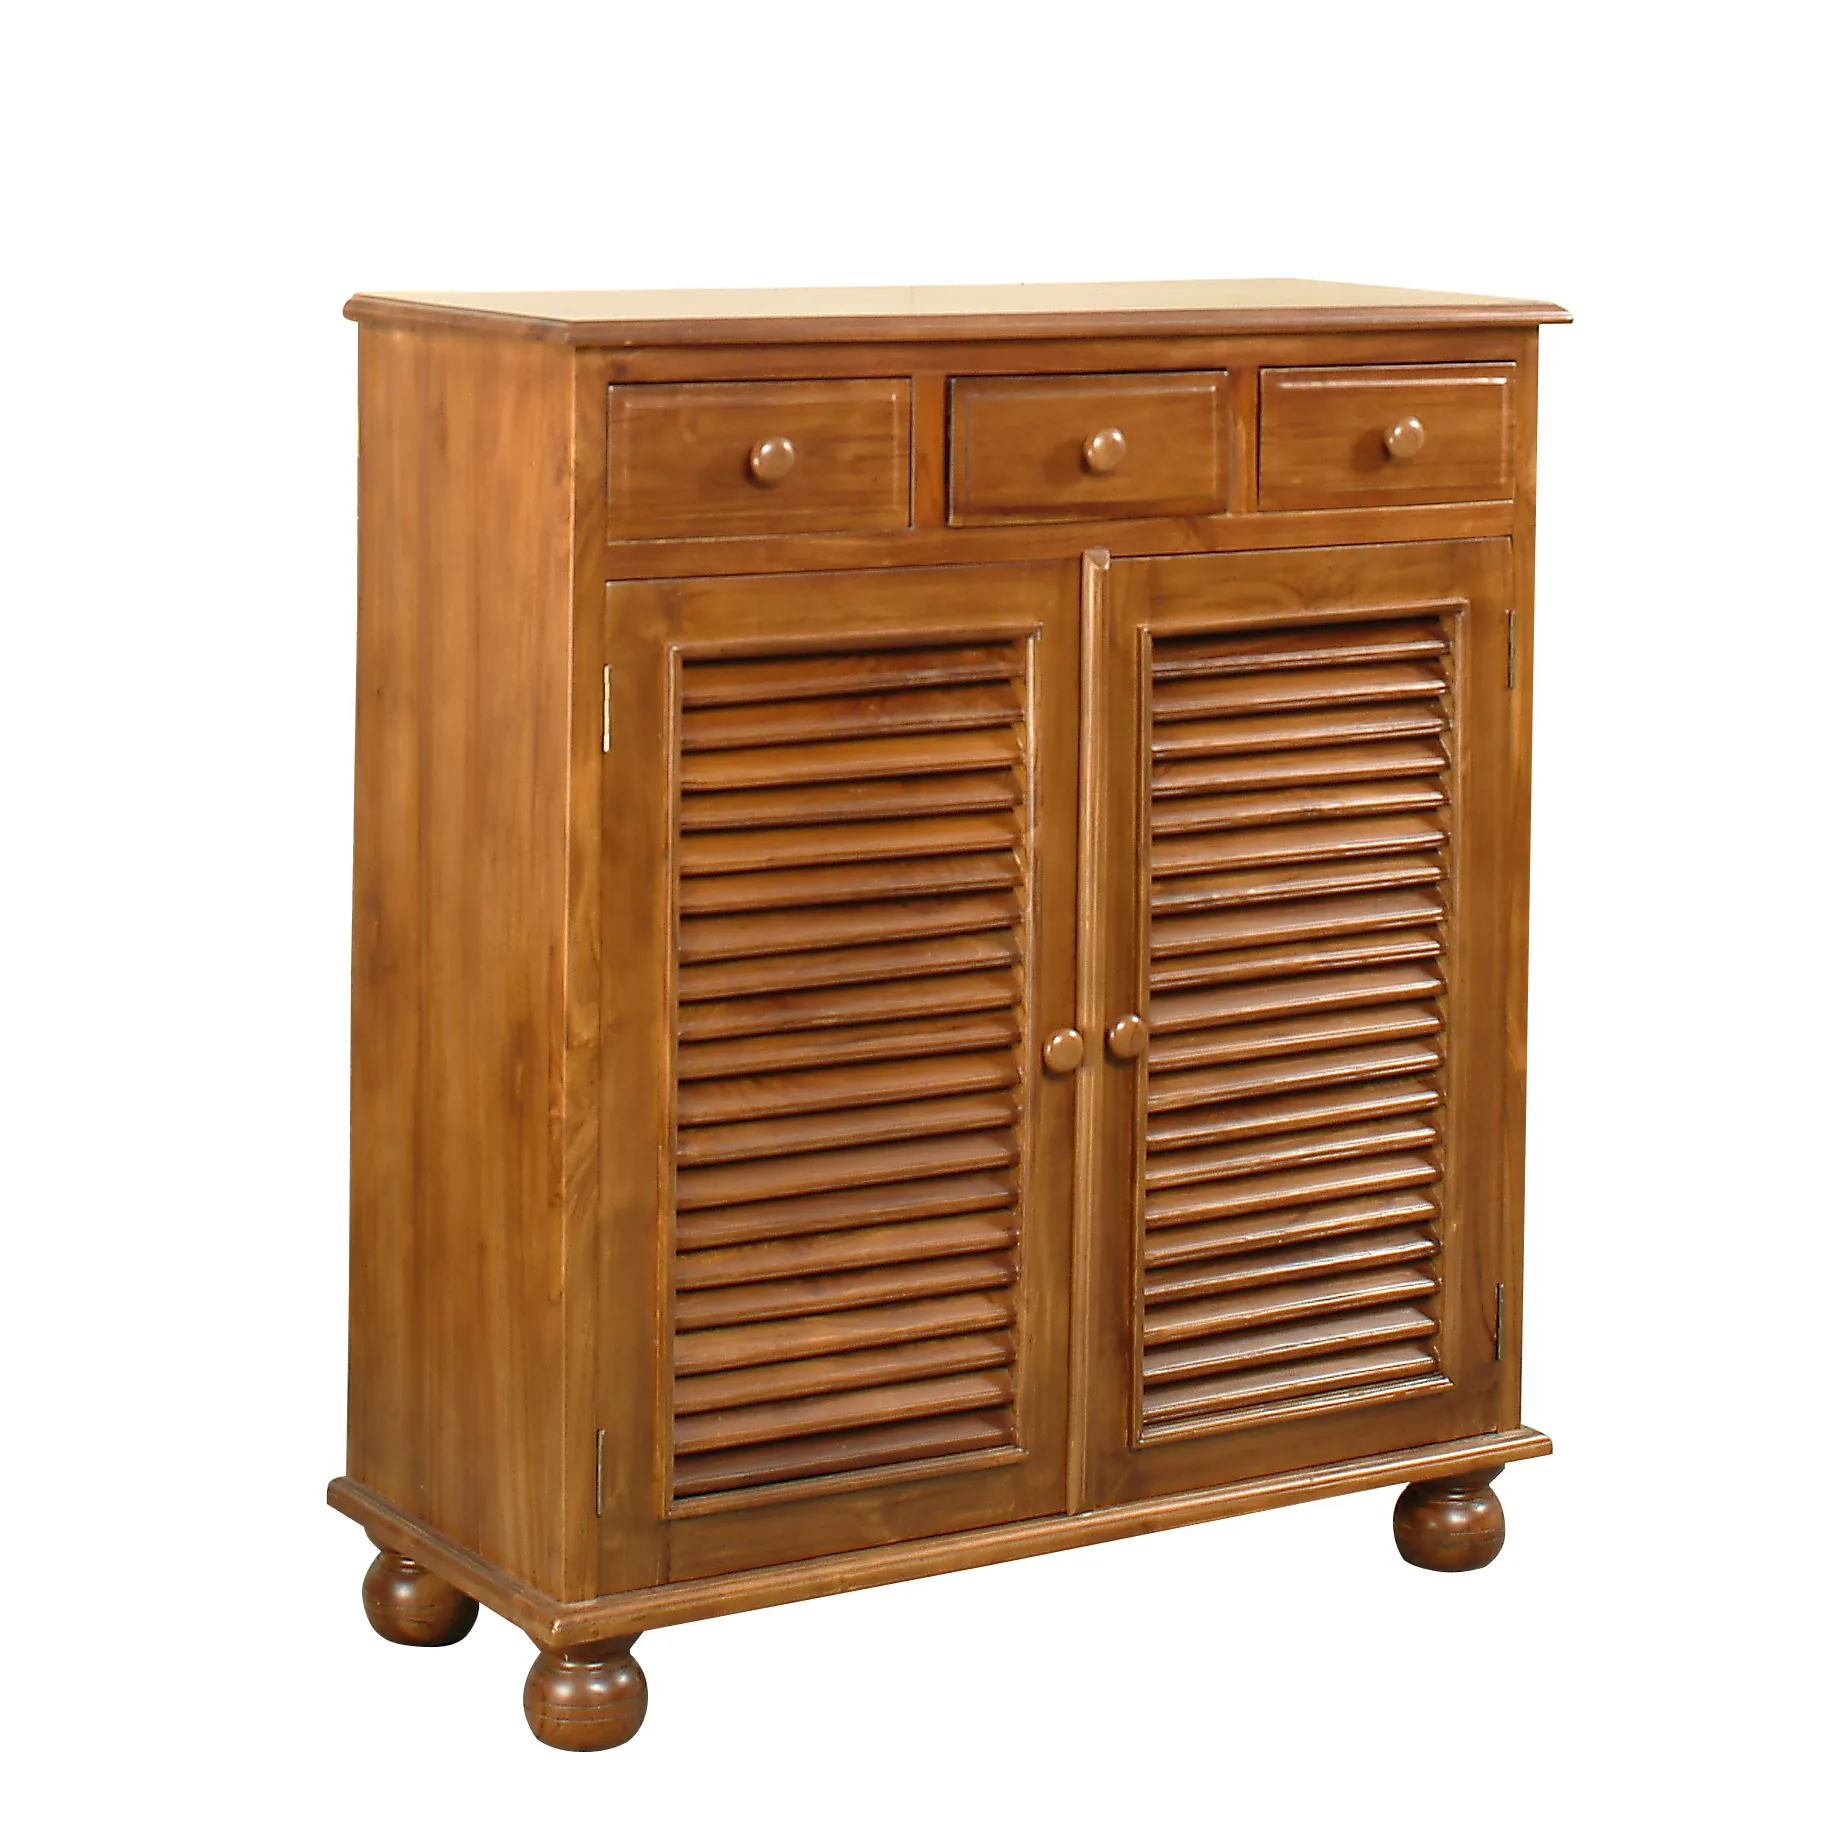 Classy Graceful Teak Shoe Cabinet with 3 Drawers, 2 Doors and Round Feet for Entryway, Hallway and Living Room